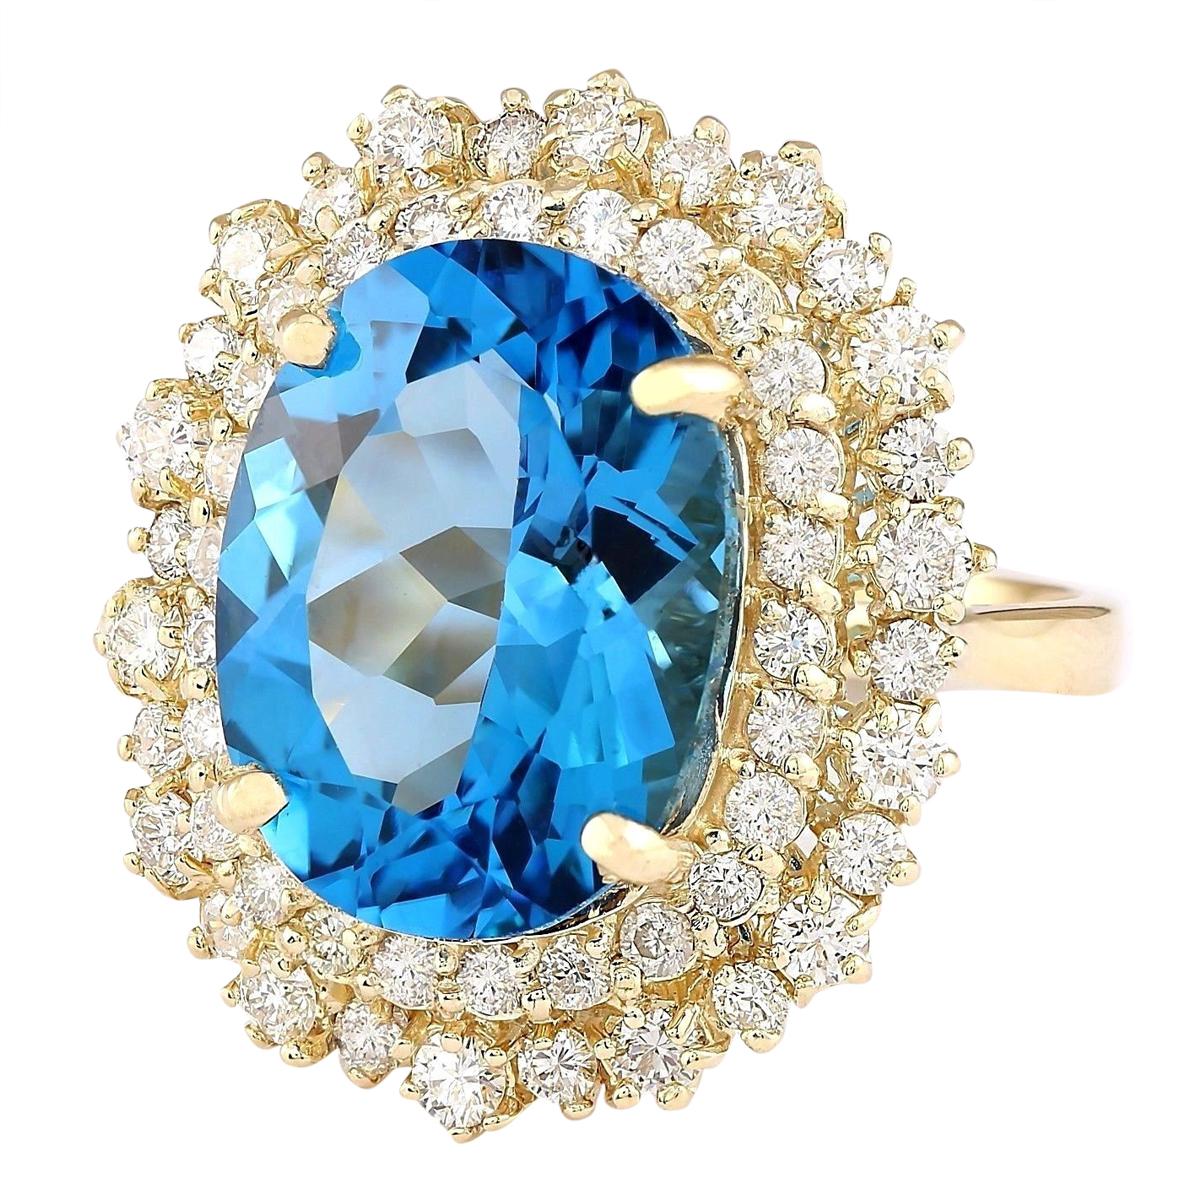 Stamped: 18K Yellow Gold
Total Ring Weight: 9.8 Grams
Ring Length: N/A
Ring Width: N/A
Gemstone Weight: Total Natural Topaz Weight is 13.64 Carat (Measures: 15.35x10.90 mm)
Color: Blue
Diamond Weight: Total Natural Diamond Weight is 2.00